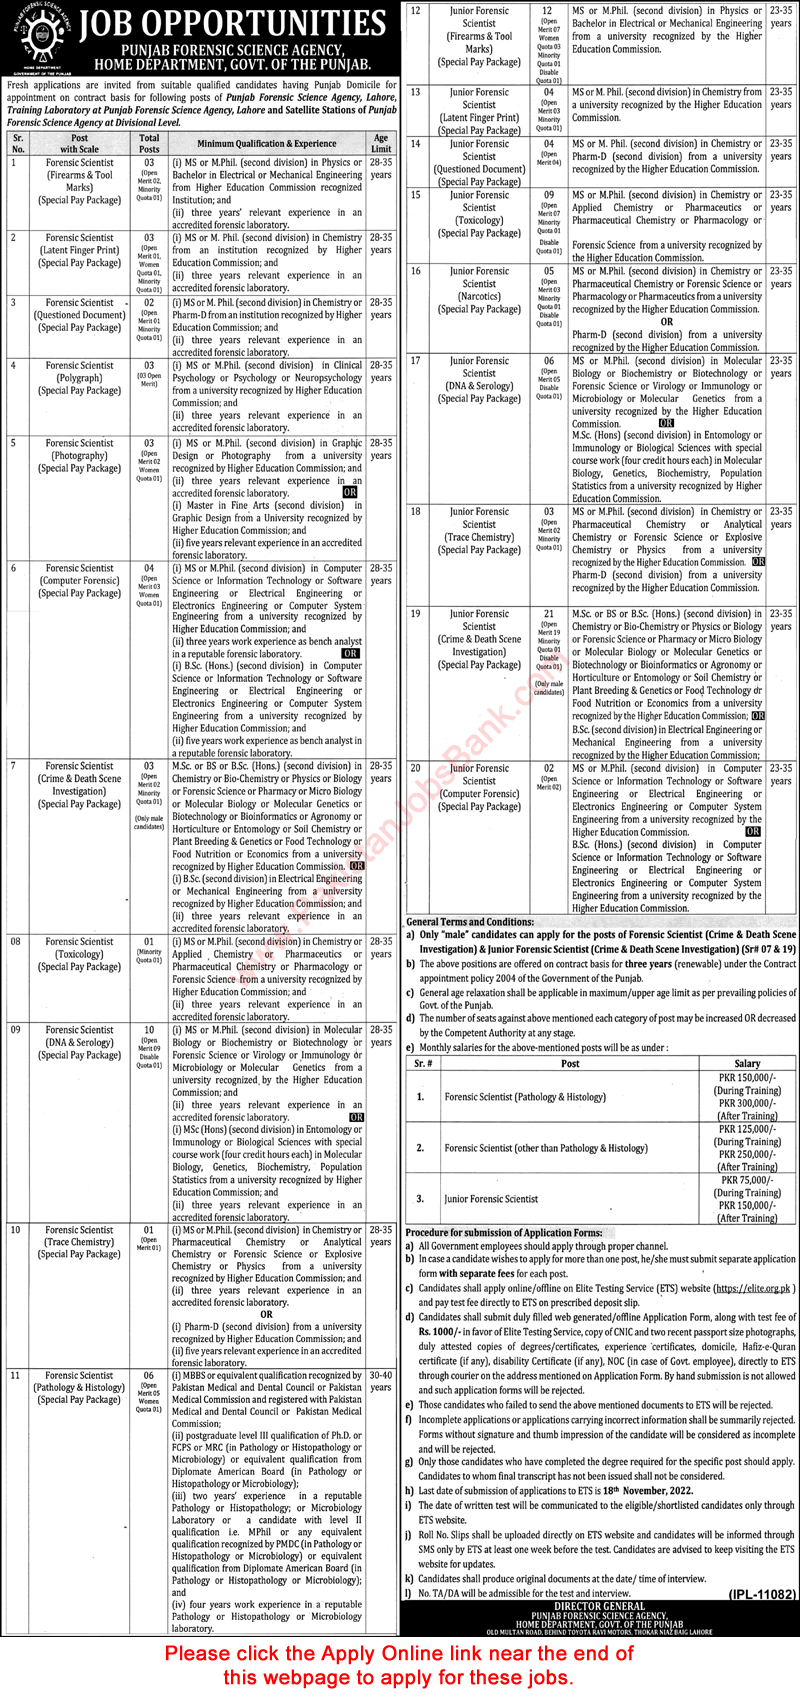 Forensic Scientist Jobs in Punjab Forensic Science Agency November 2022 PFSA ETS Apply Online Latest